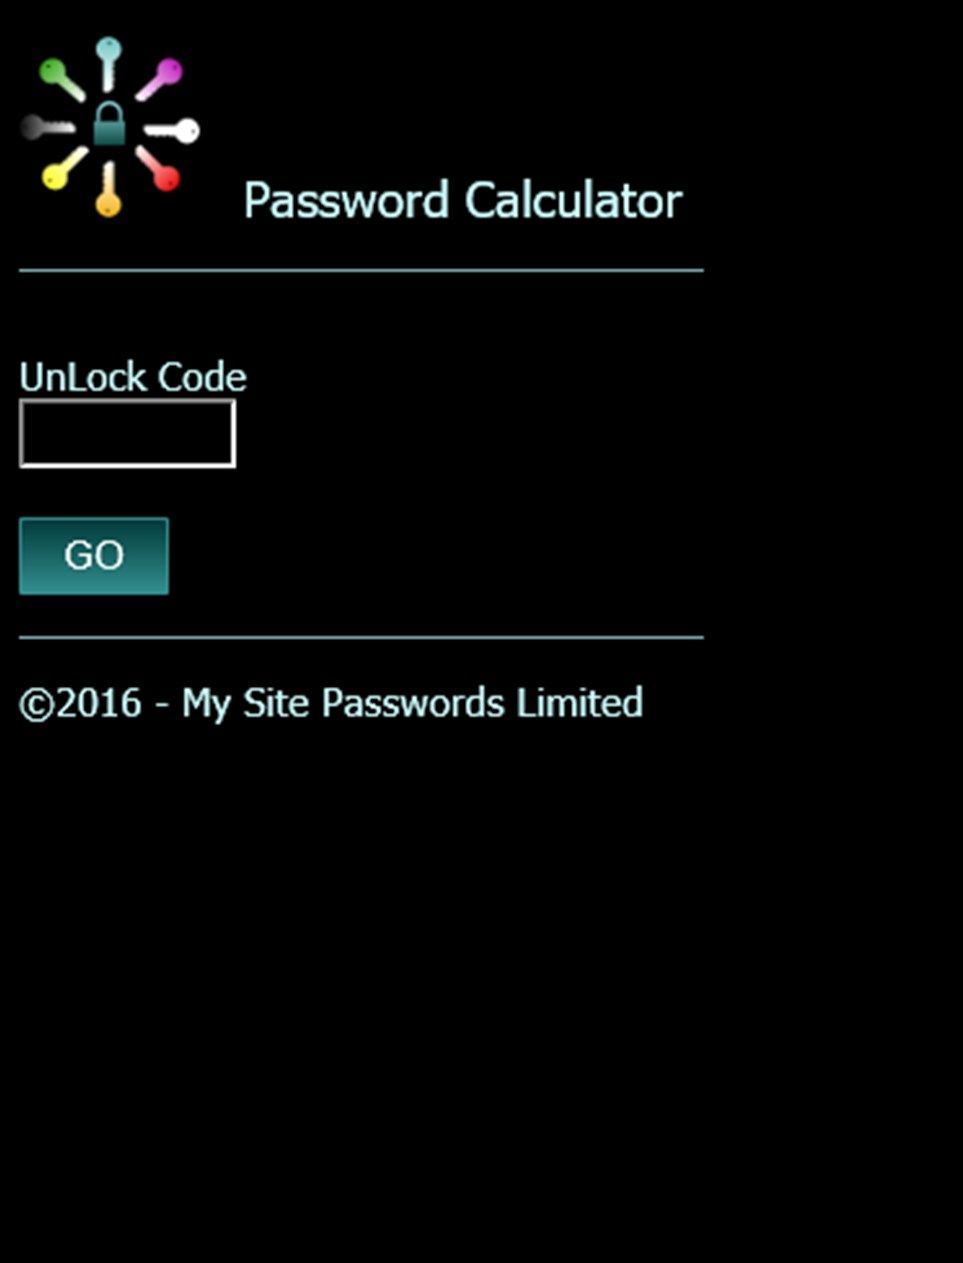 For security and to prevent others accessing your password a screen lock or pin is required every time you use the app.